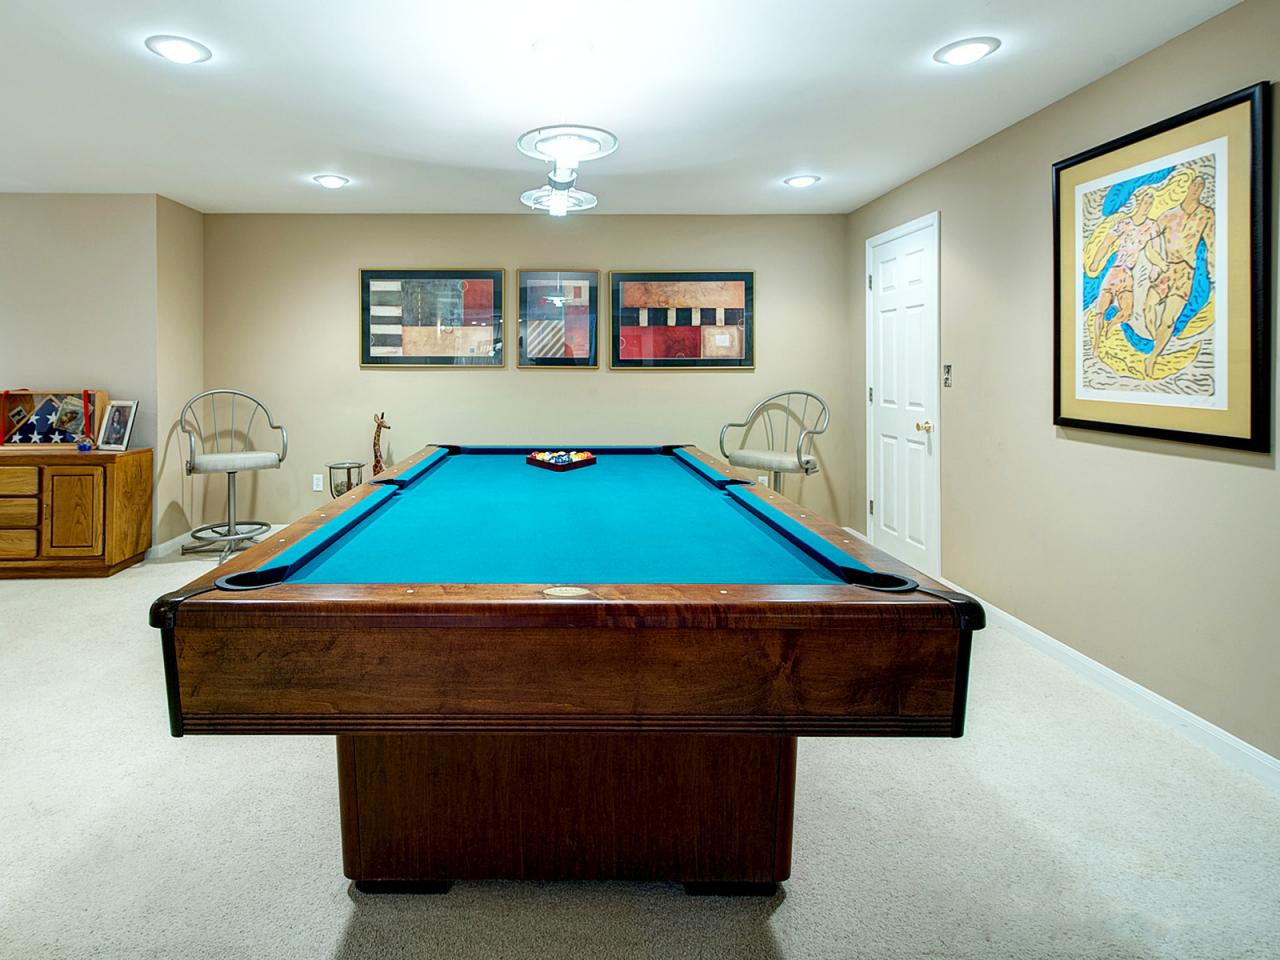 Traditional Neutral Game Room With Pool Table - Billiard Table - HD Wallpaper 